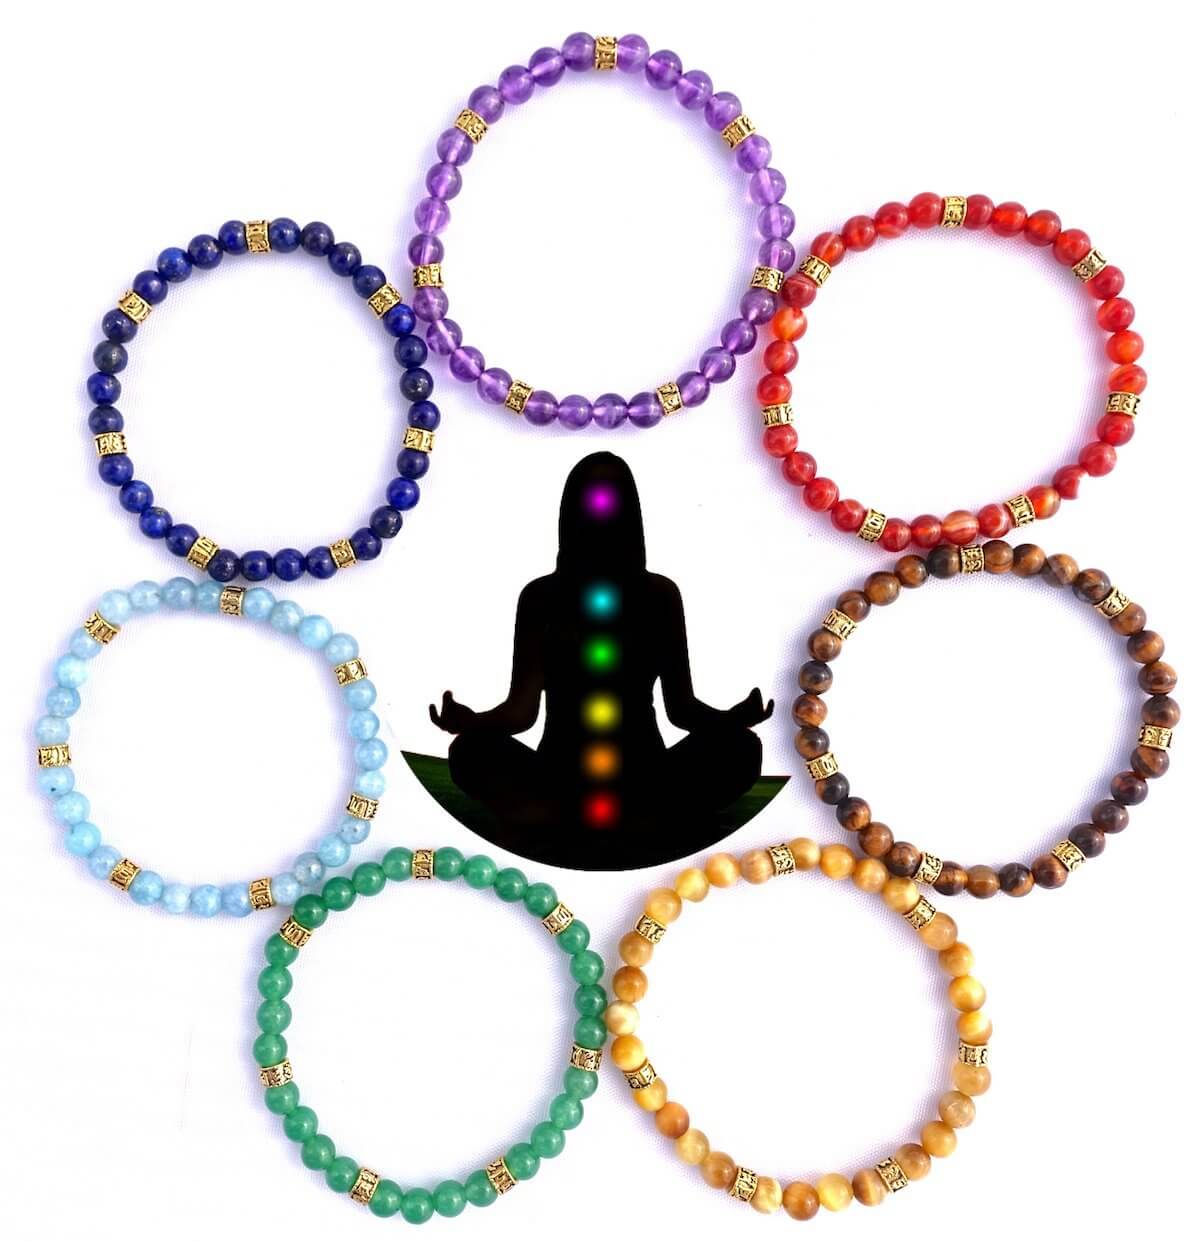 7 Chakra Alignment Necklace by Backpack Buddha